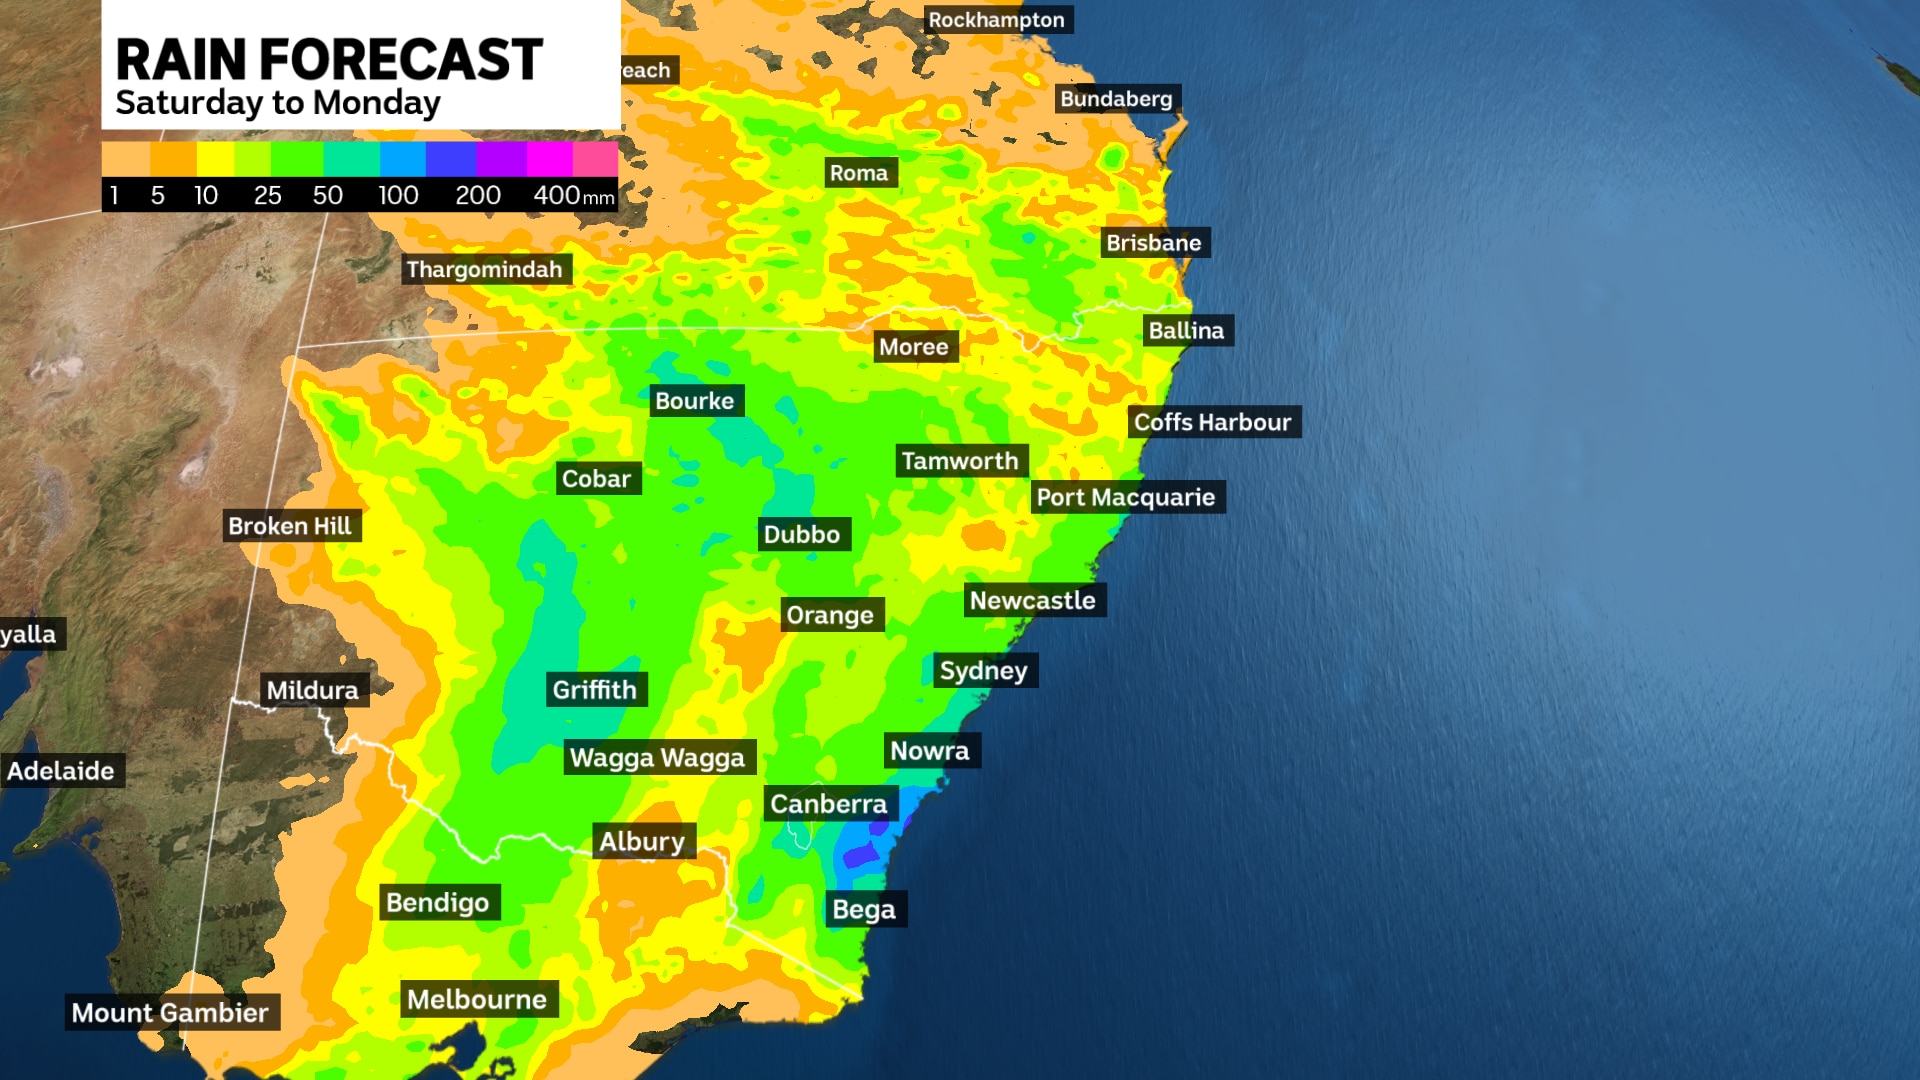 a weather map showing rain forecast over new south wales from saturday to monday in may